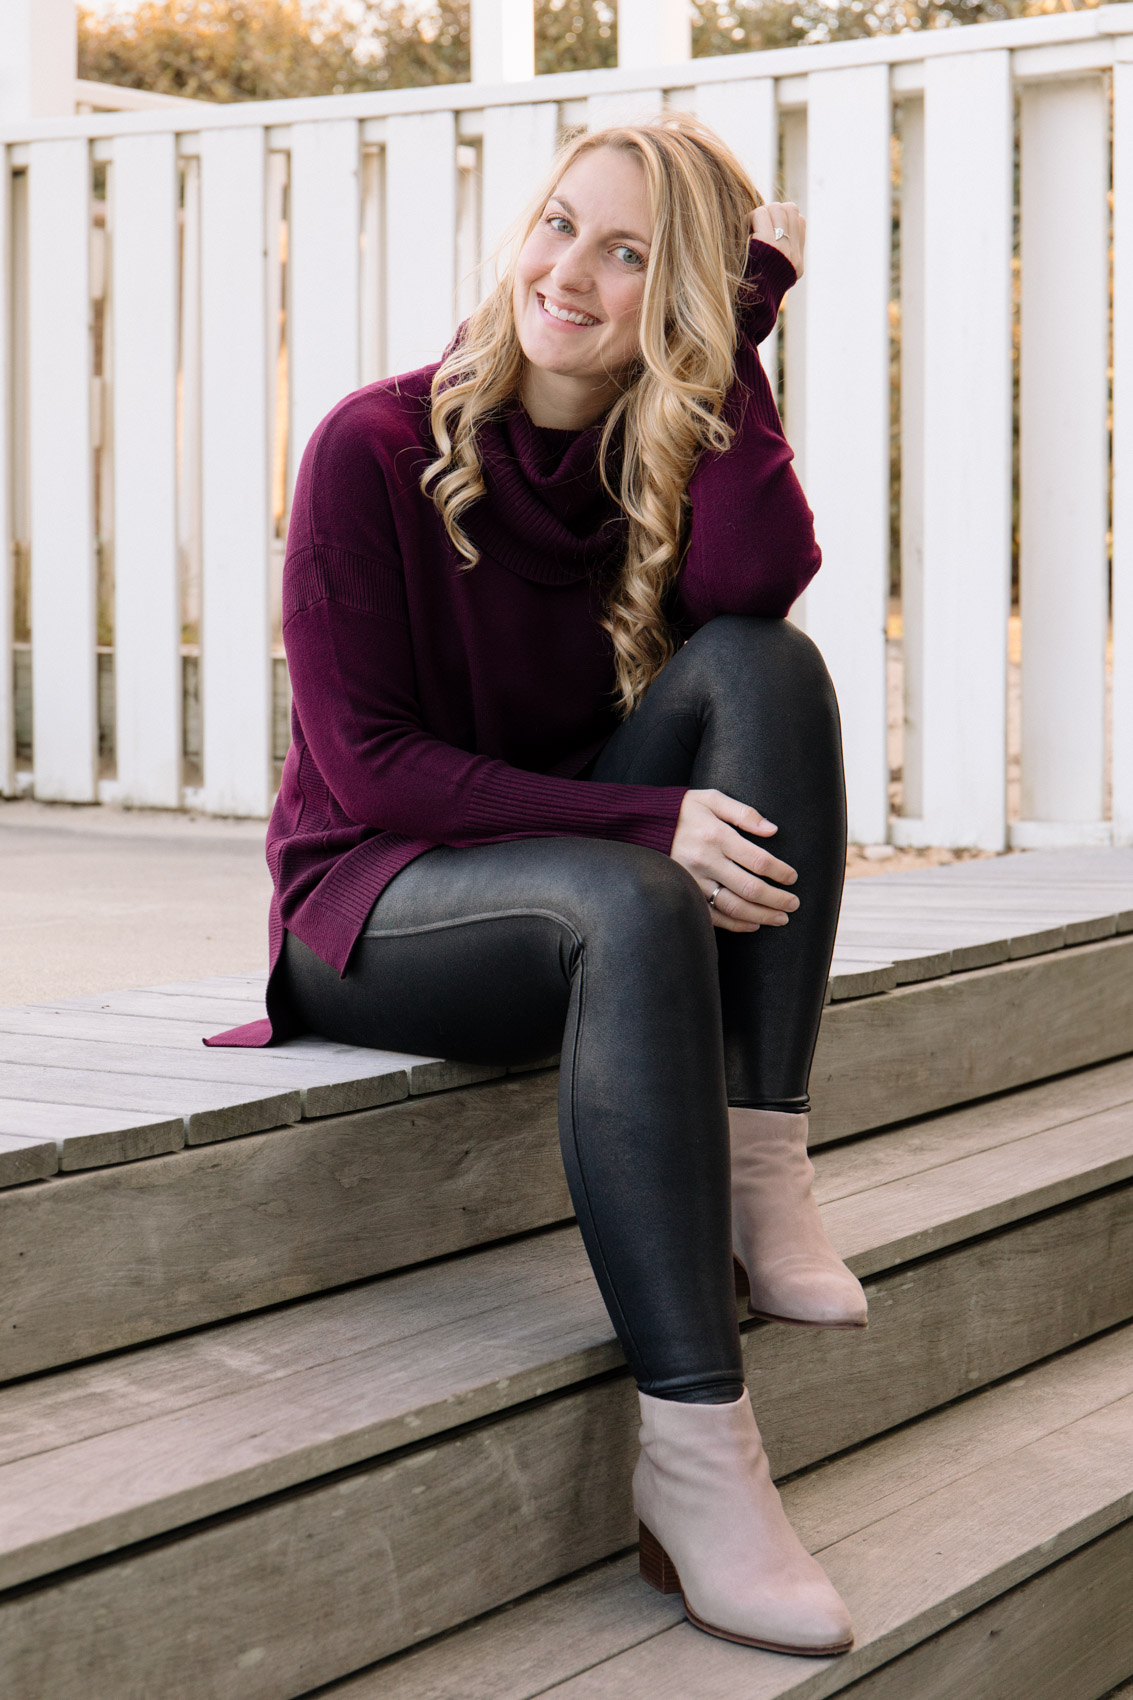 Spanx Faux Leather Leggings Review - Allyn Lewis